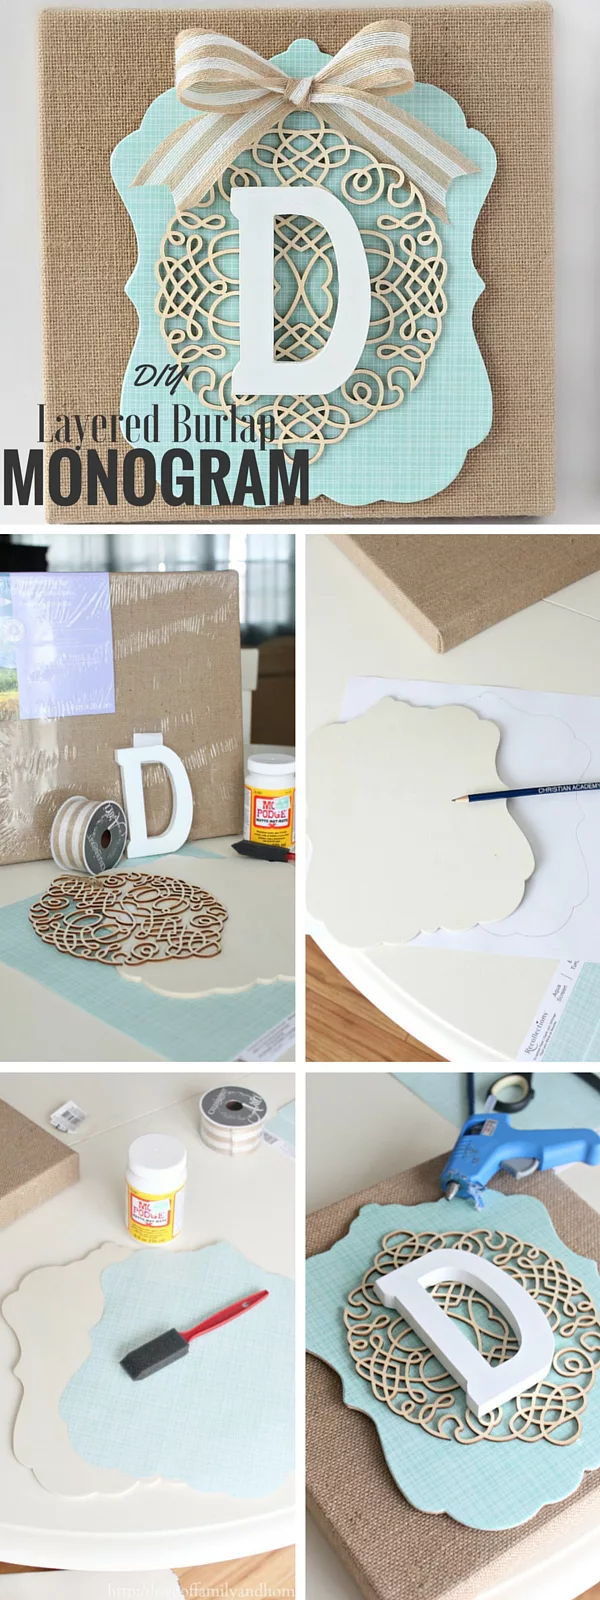 Check out the tutorial:  Layered Burlap Monogram